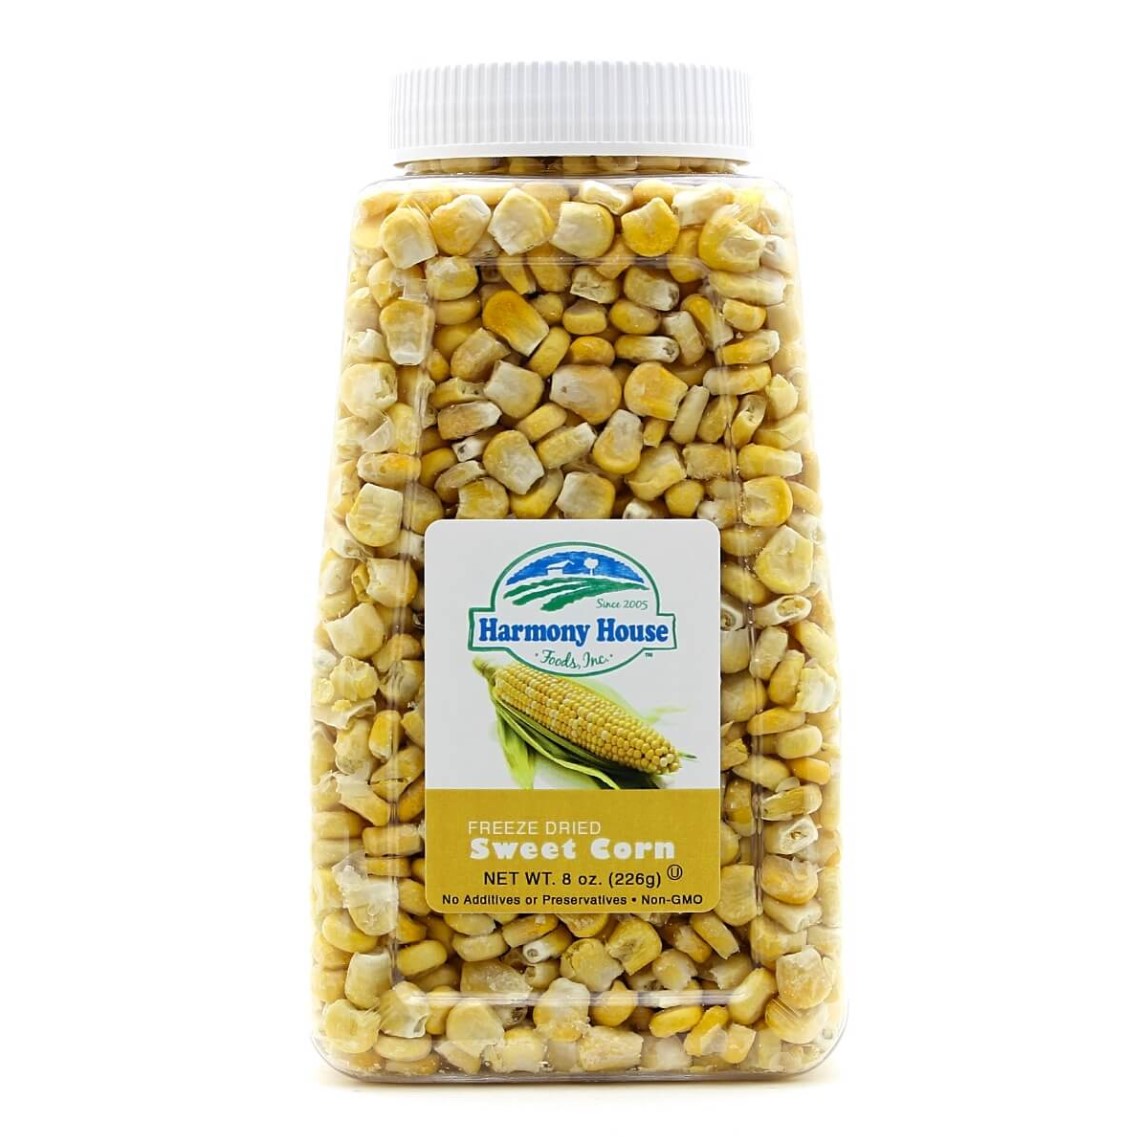 A jar of Super Sweet Corn from Harmony House on a white background.